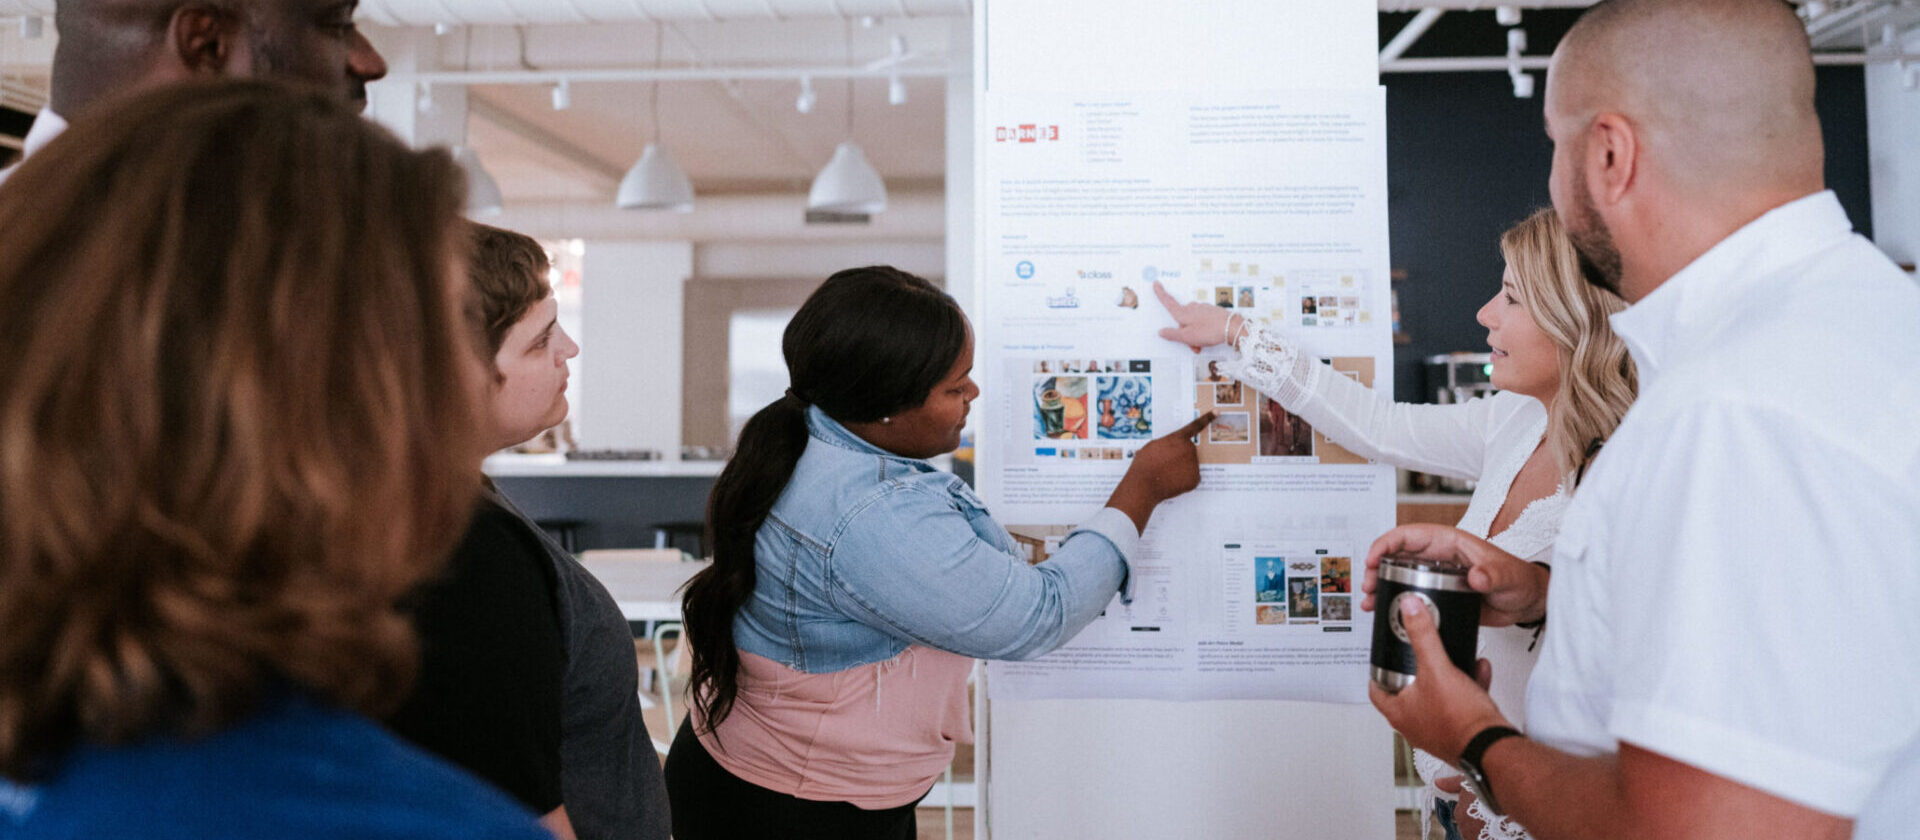 A group of people collaborating in front of print out of a project with screens